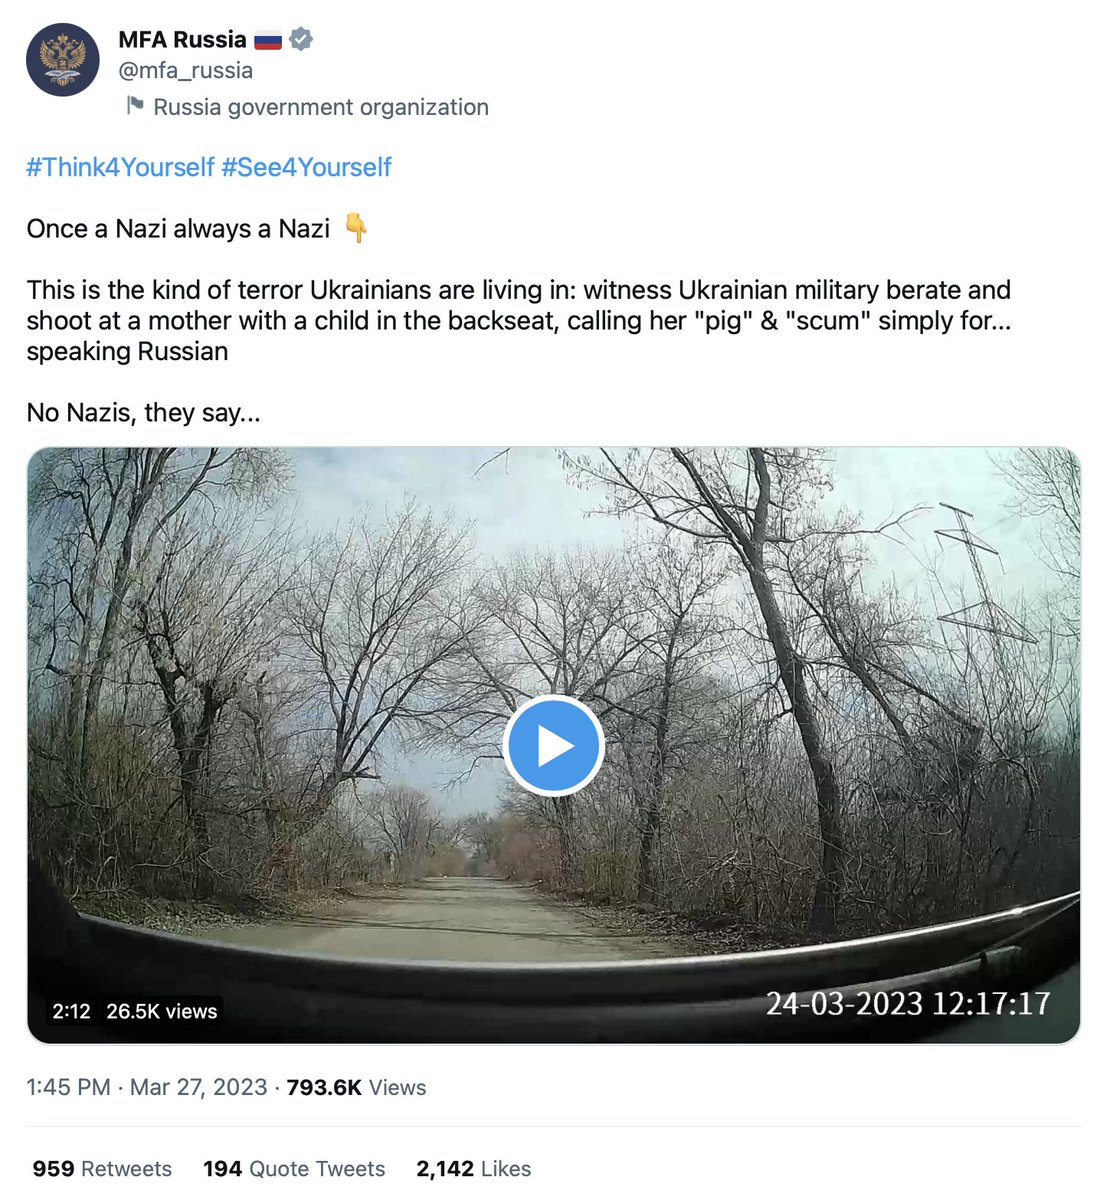 Yet again, @mfa_russia gets caught promoting fake videos from Ukraine, this time caught out by a geolocation that places the scene of the video in Russian territory. @mfa_russia deleted the tweet without acknowledging it was fake. twitter.com/GeoConfirmed/s…